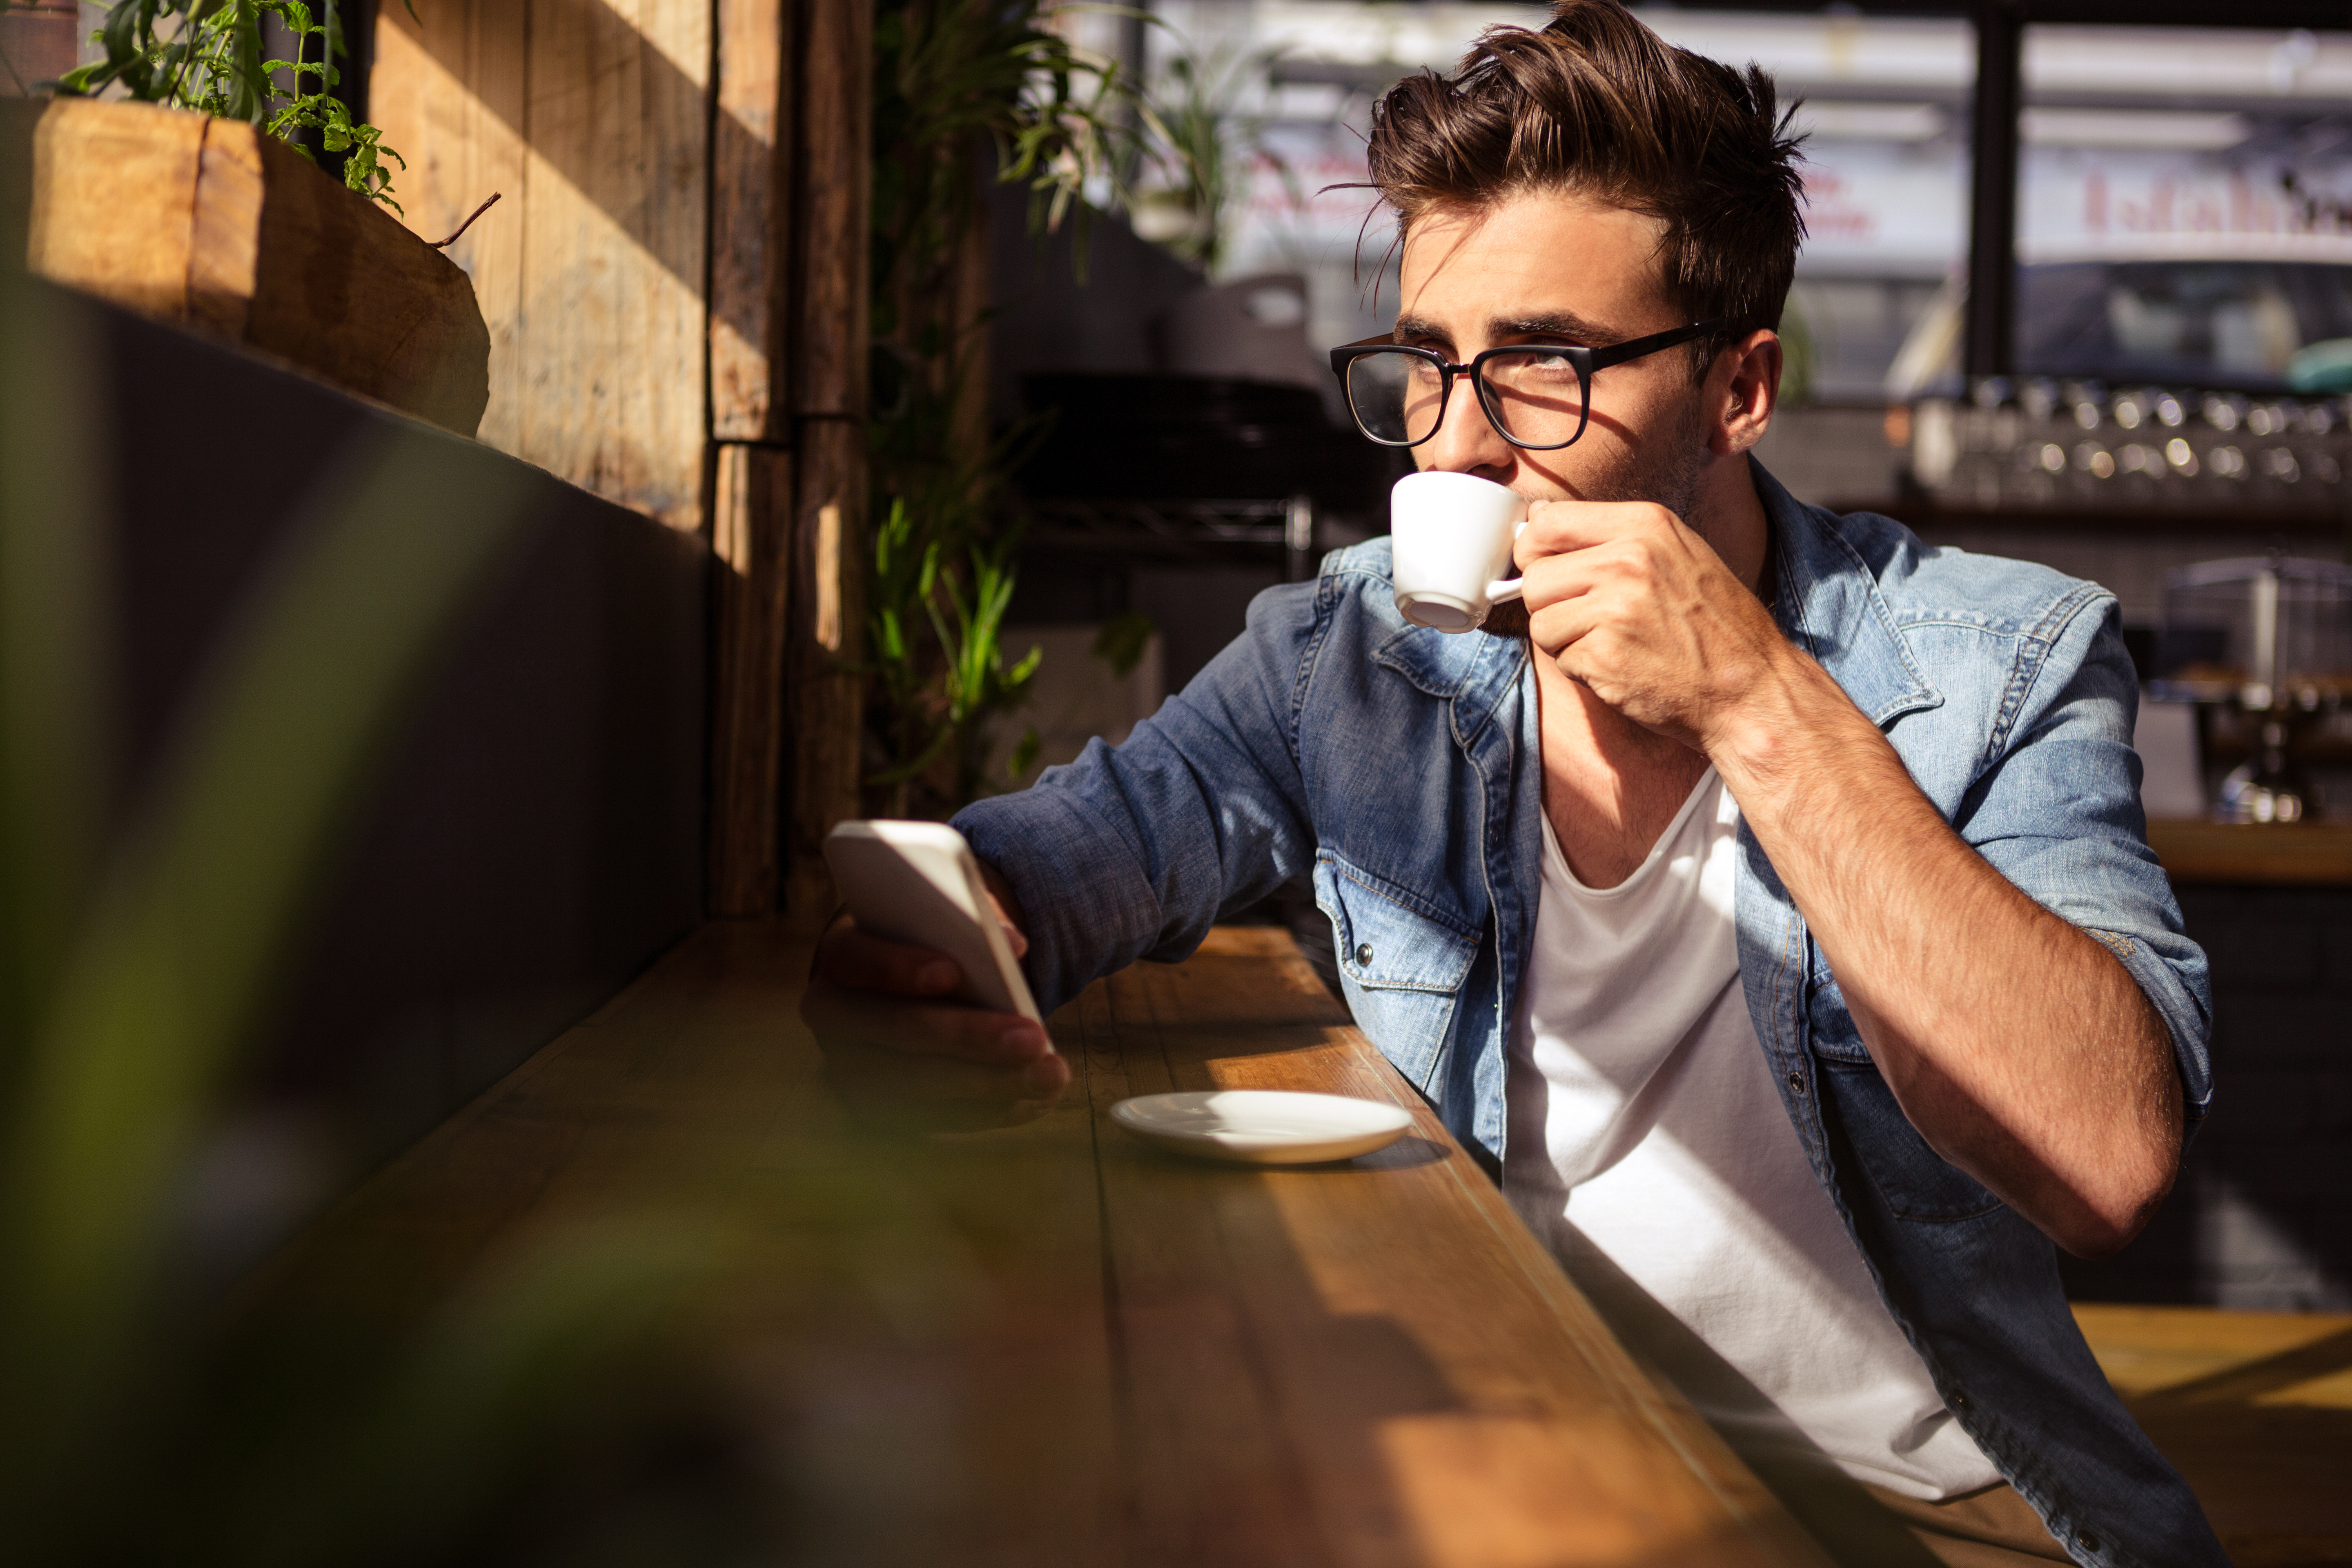 Man drinking a cup of coffee in the cafe | Source: Shutterstock